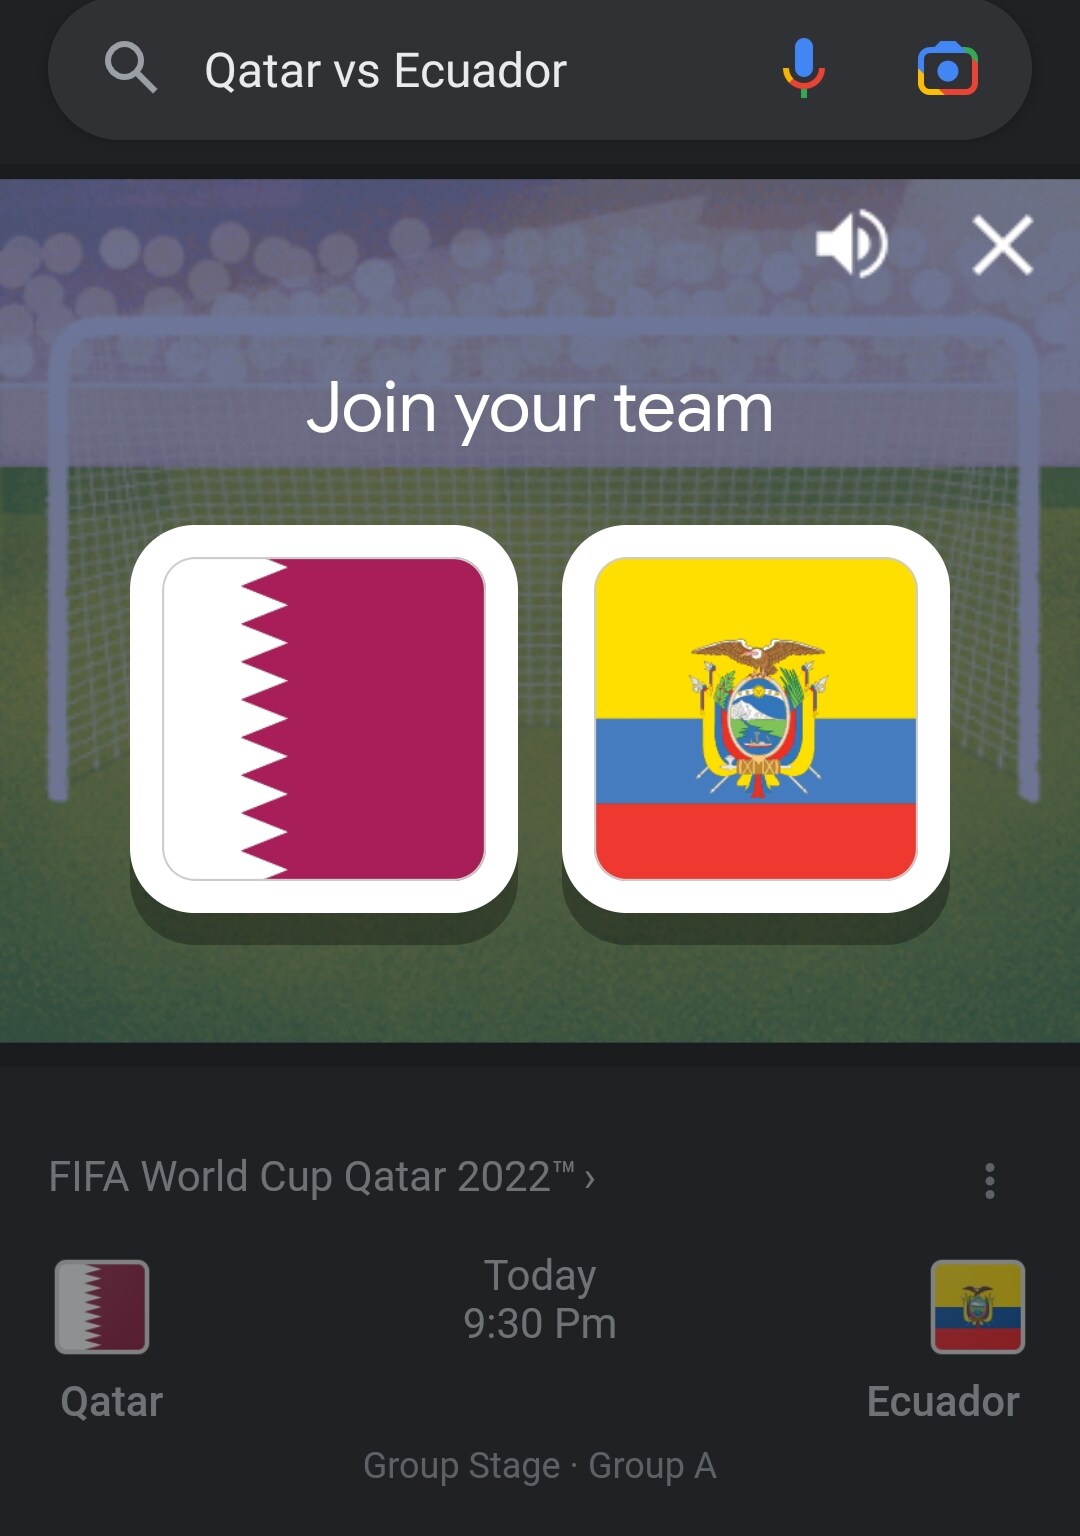 Google Doodle Kicks Off FIFA World Cup Qatar 2022; Here's Step-by-step  Guide to Play Online Game on Mobile Device - News18